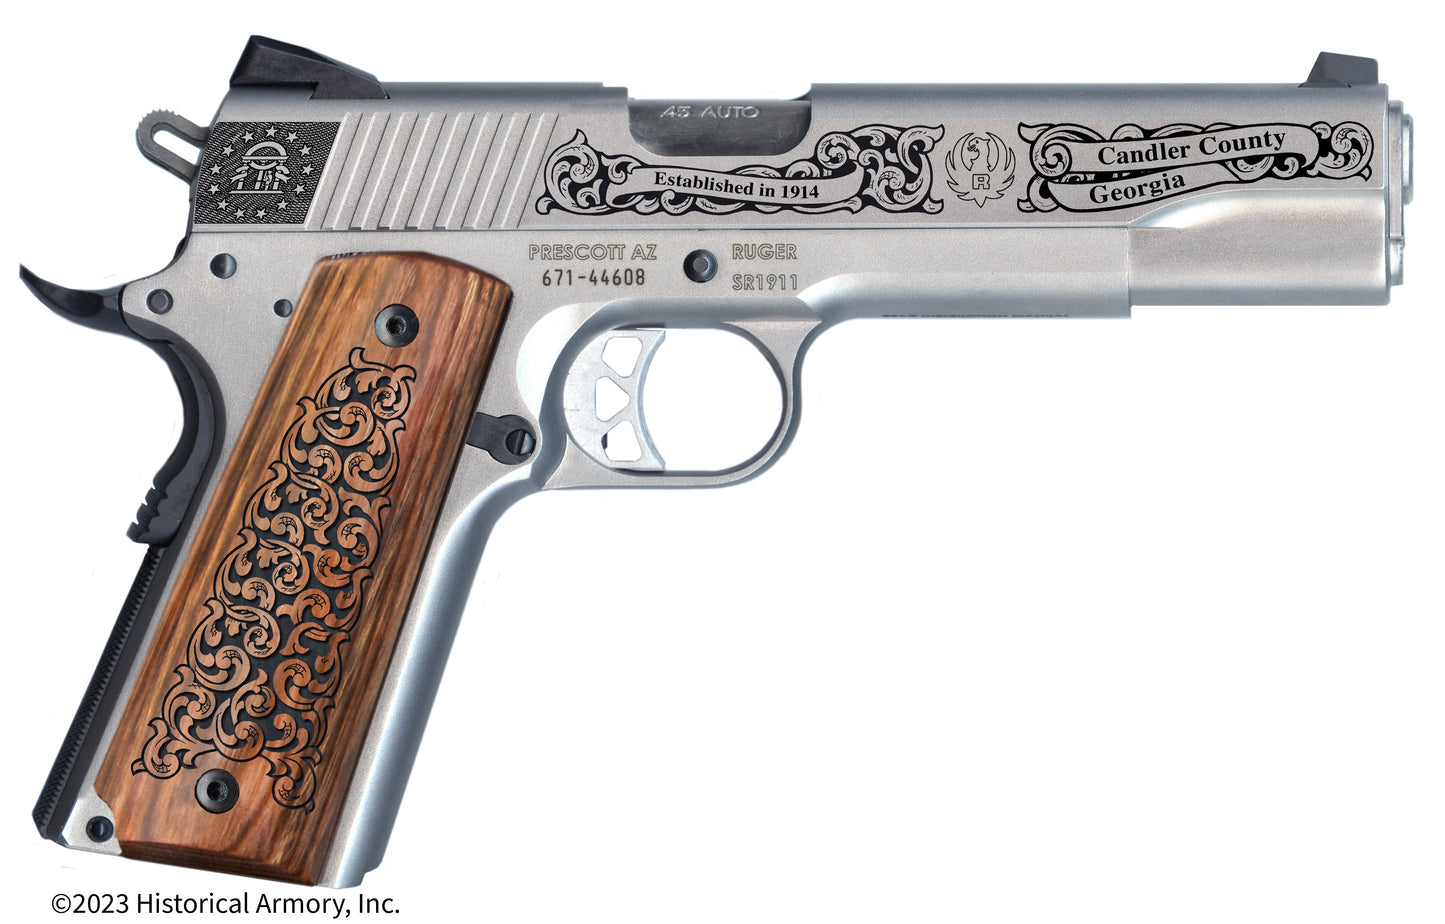 Candler County Georgia Engraved .45 Auto Ruger 1911